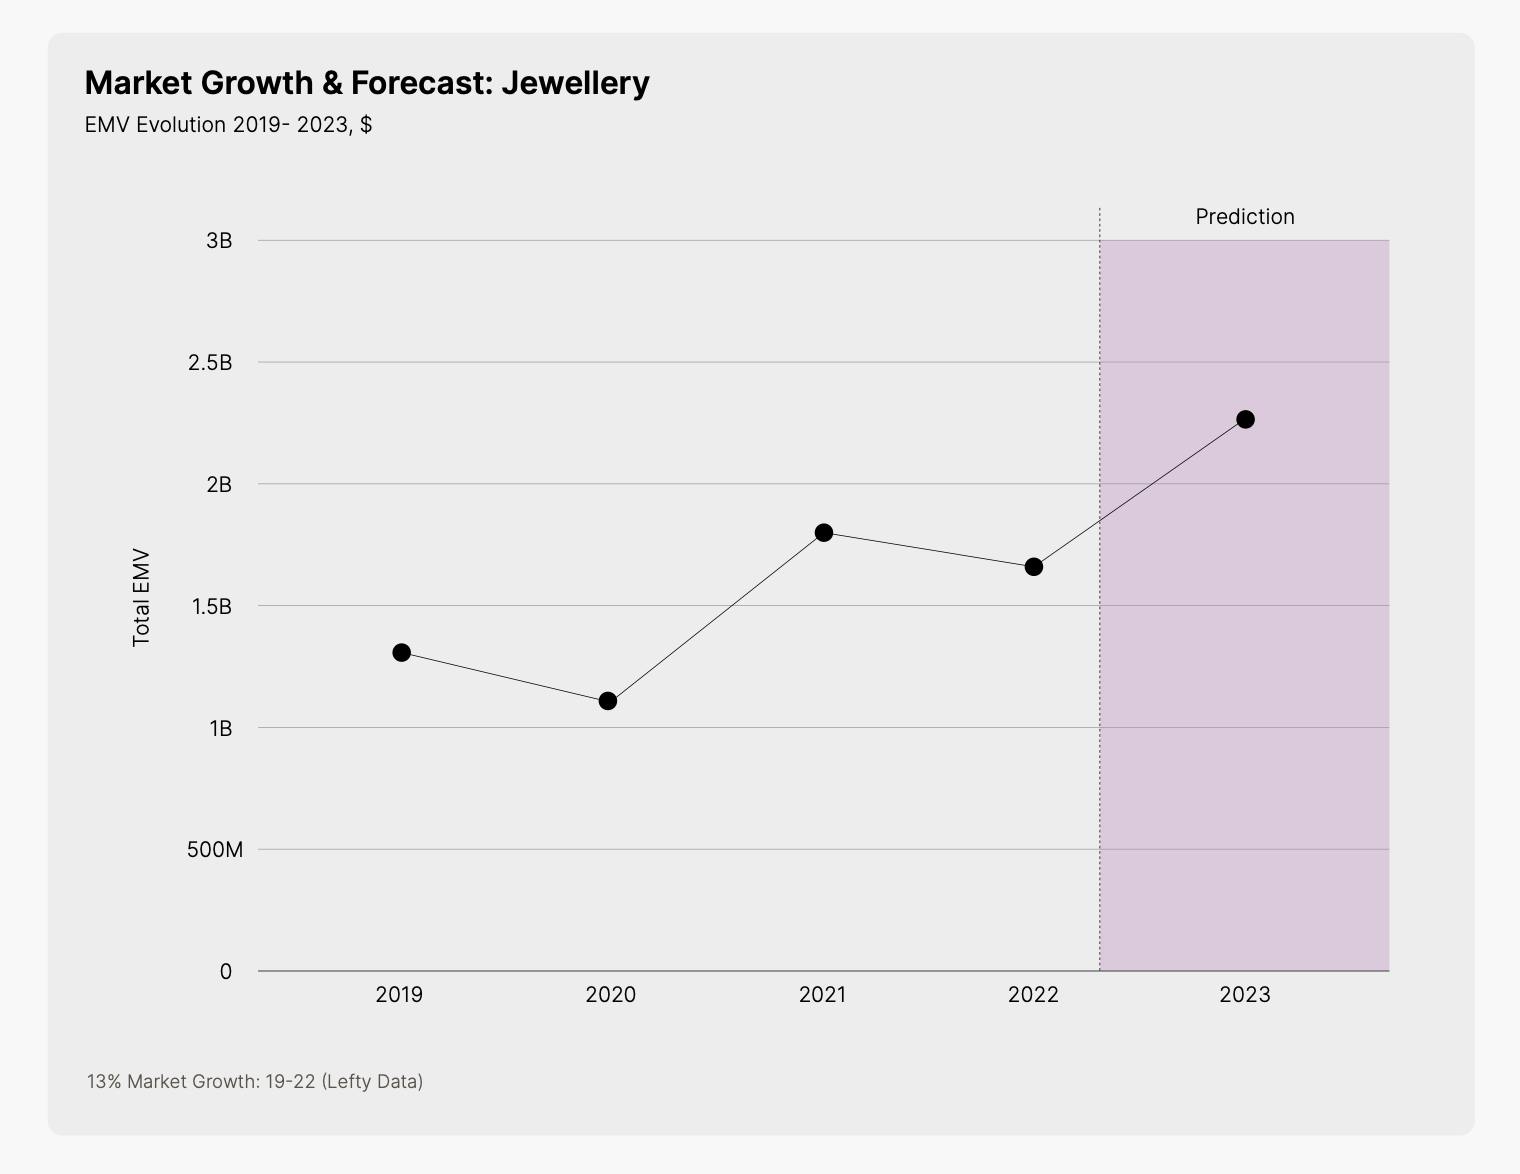 The Growth of Jewelry Markets